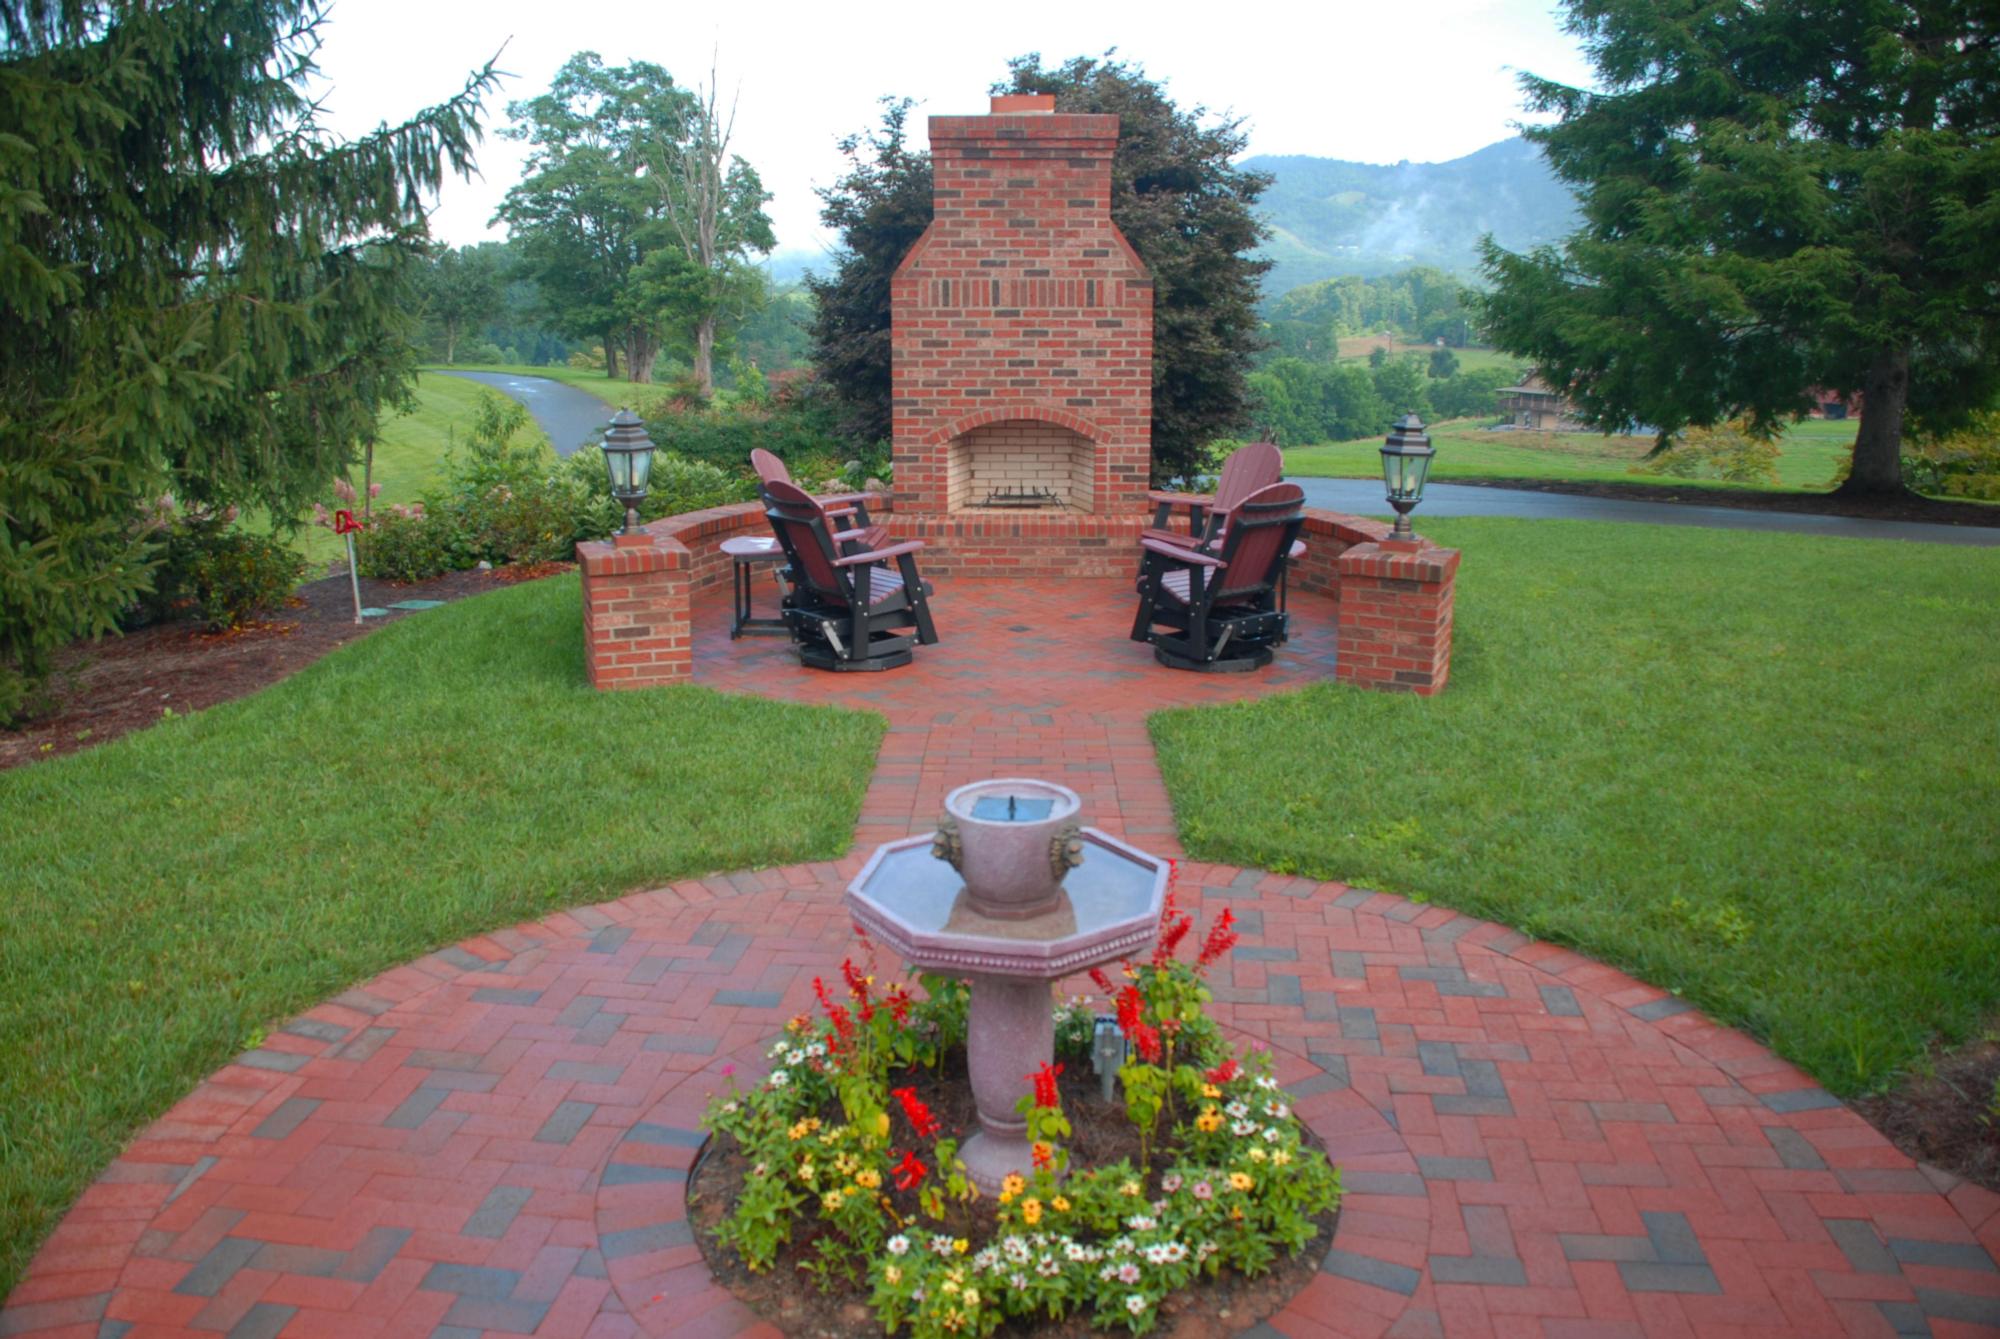 Image of a brick firepit and patio area with manicured lawn and flowers